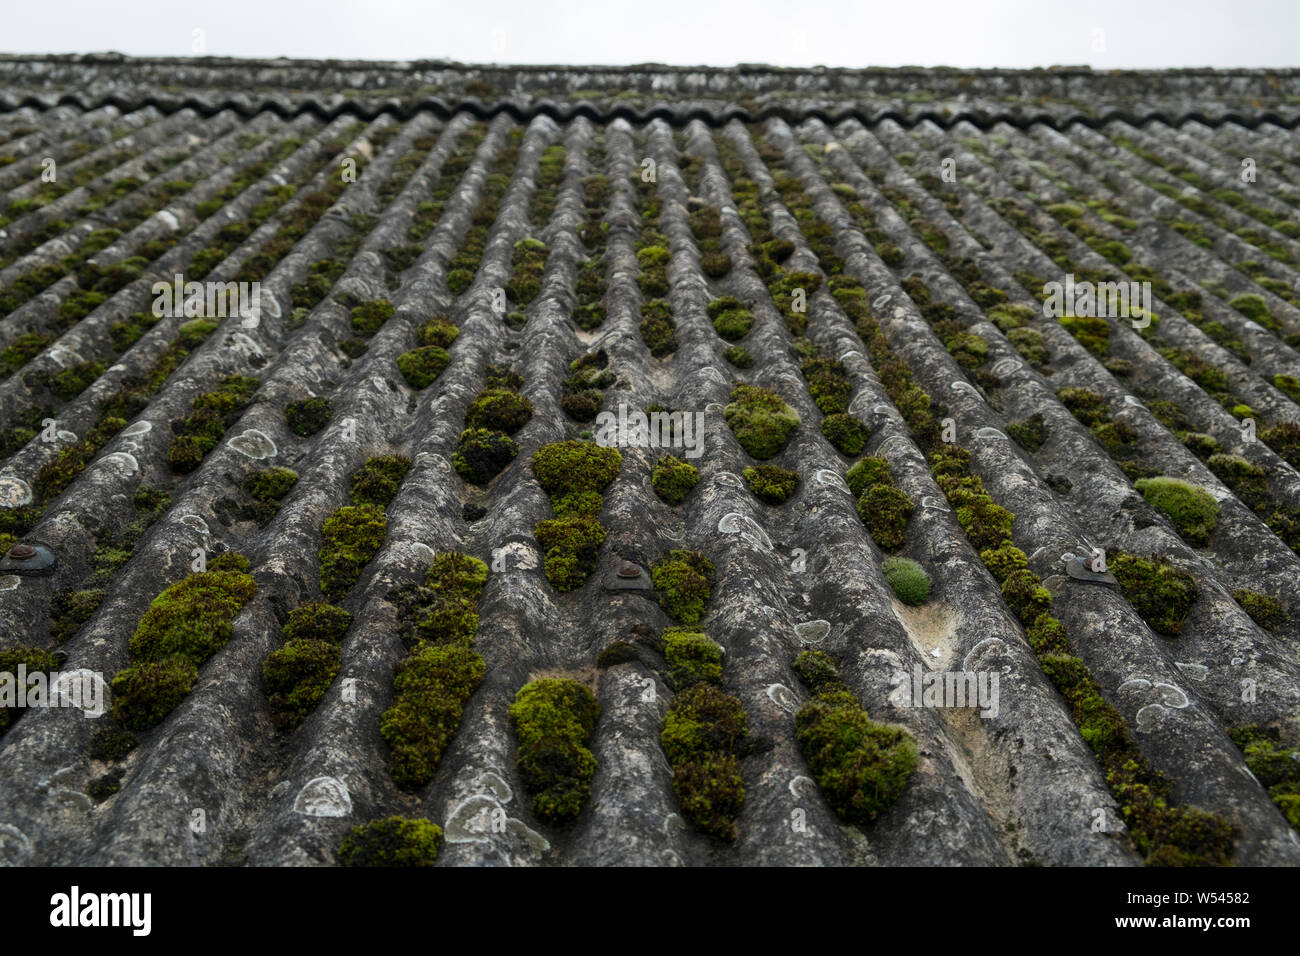 Moss lying on top of a corrugated asbestos roof Stock Photo